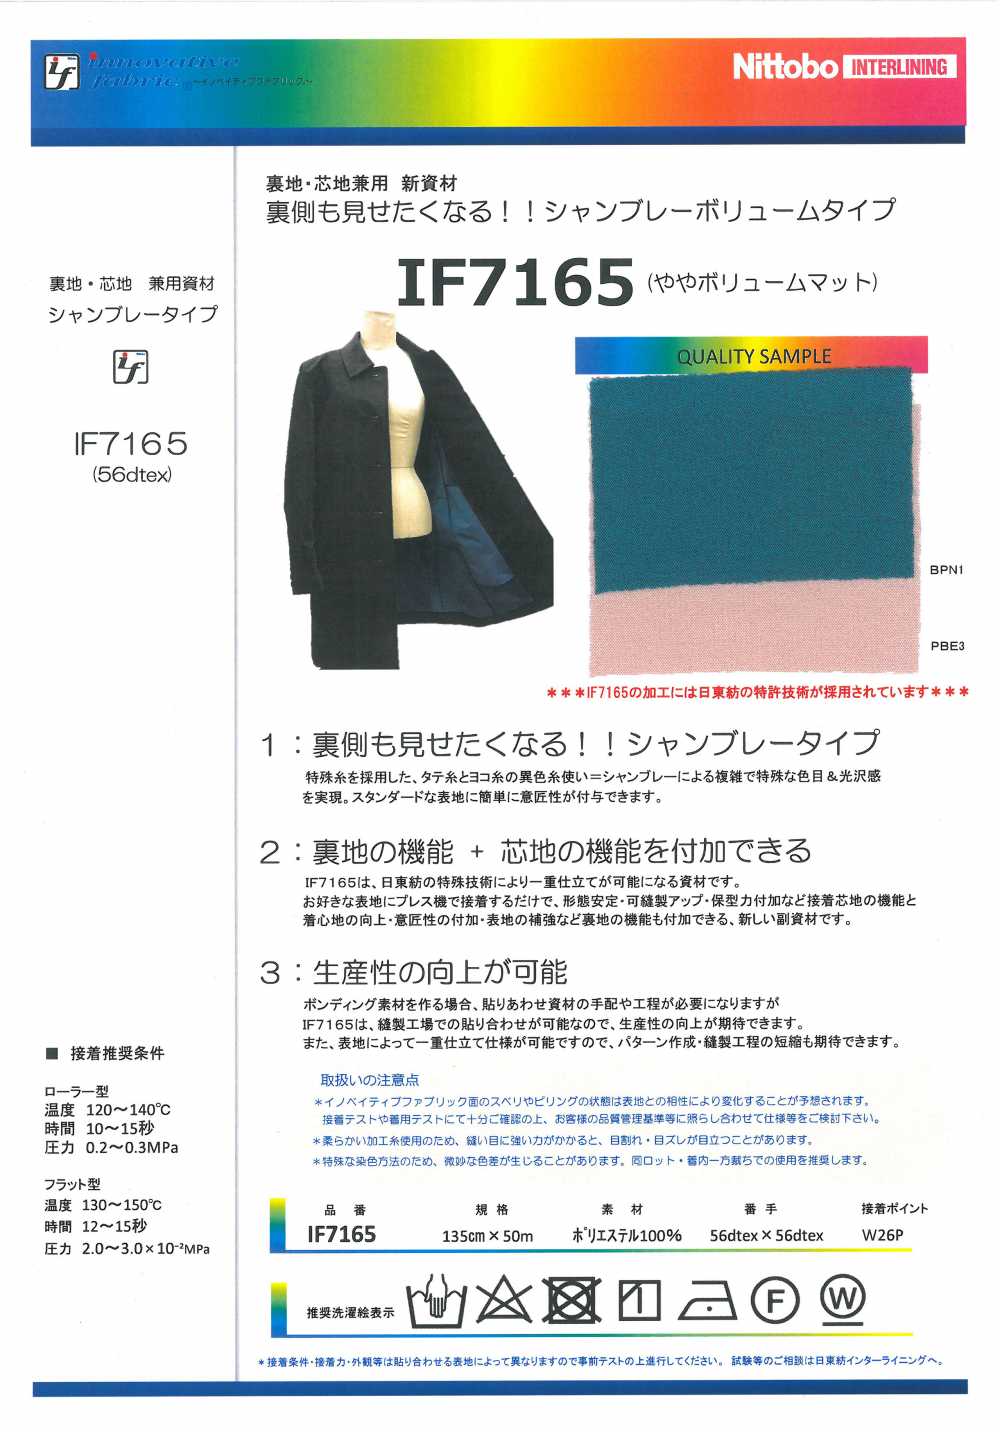 IF7165 New Material For Both Lining And Interlining Chambray Volume Type (Slightly Volume Mat) Nittobo